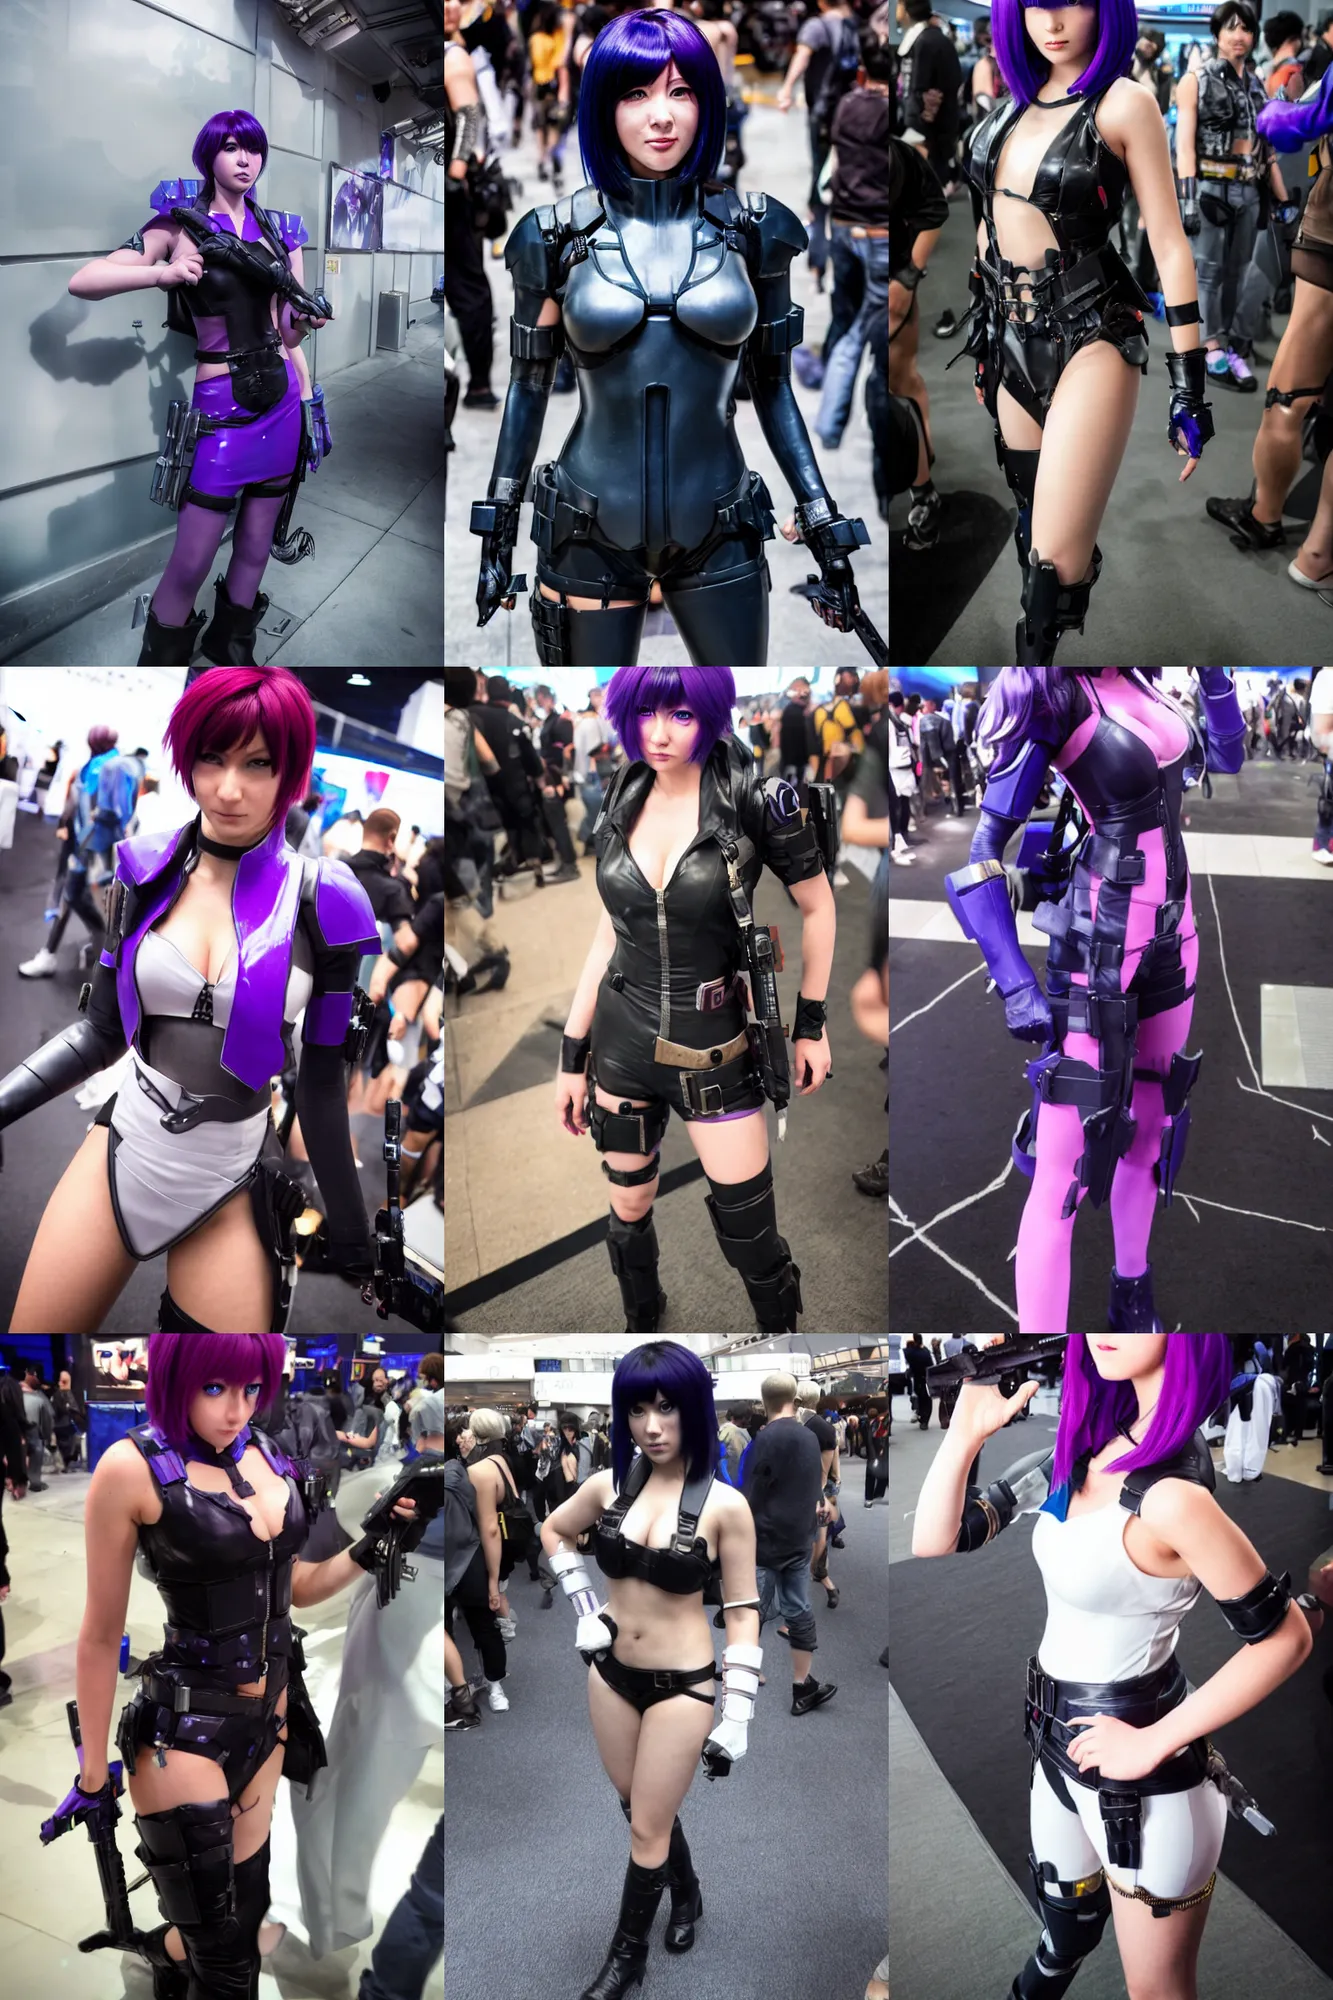 Prompt: beautiful cosplayer dressed as motoko kusanagi, photograph taken at e 3 conference, frisky and energetic atmosphere